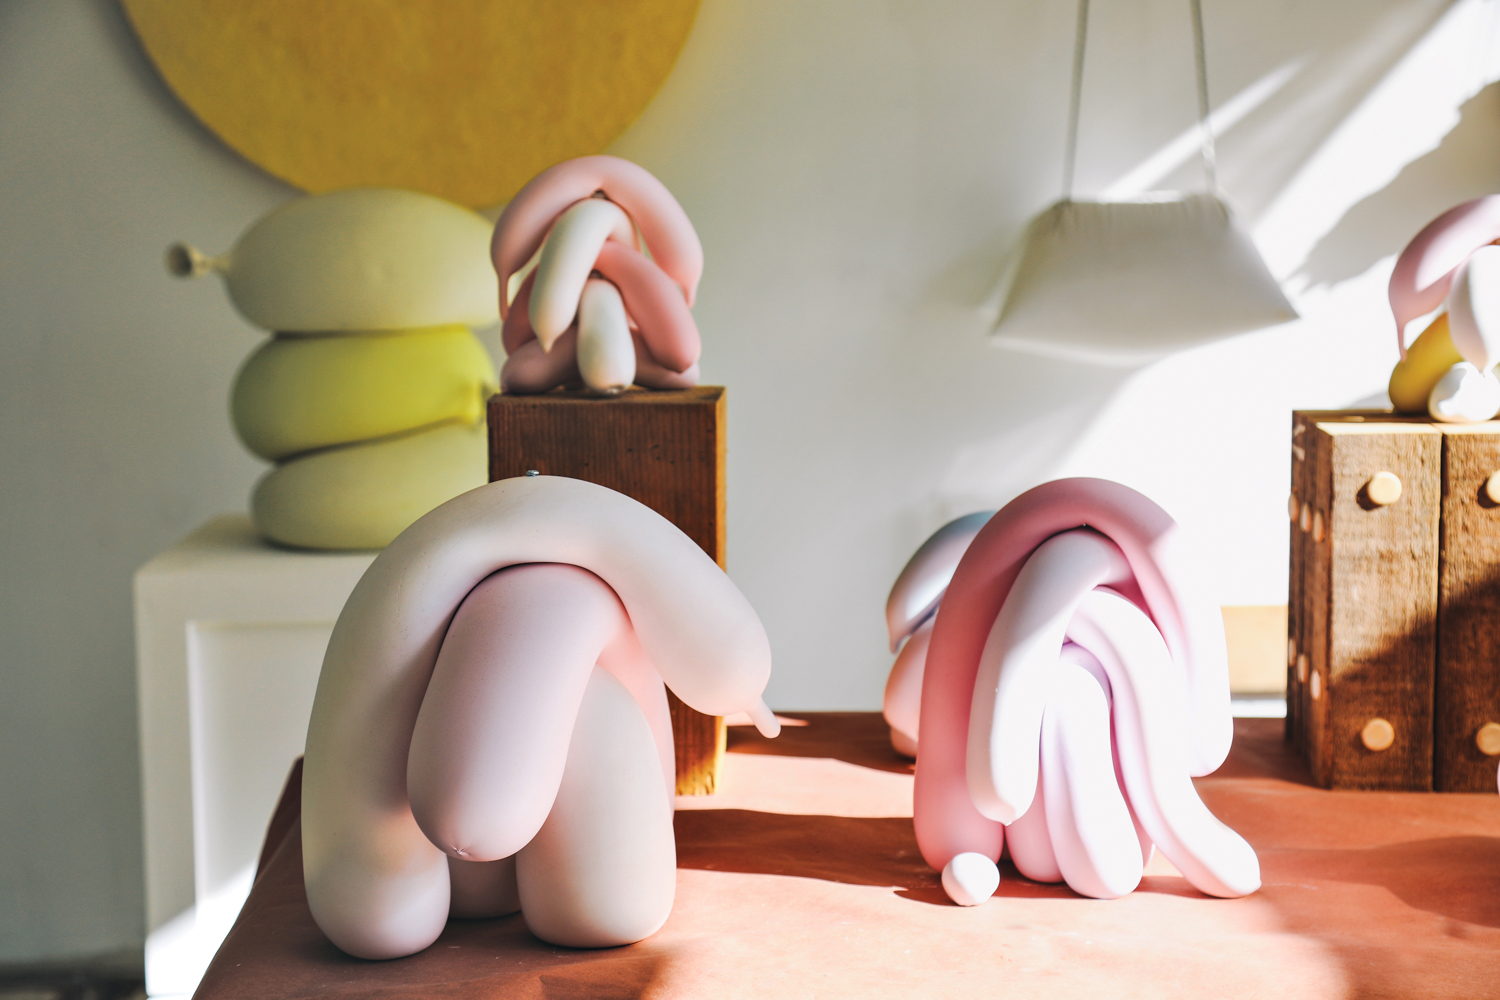 series of cast balloons in slumped statues